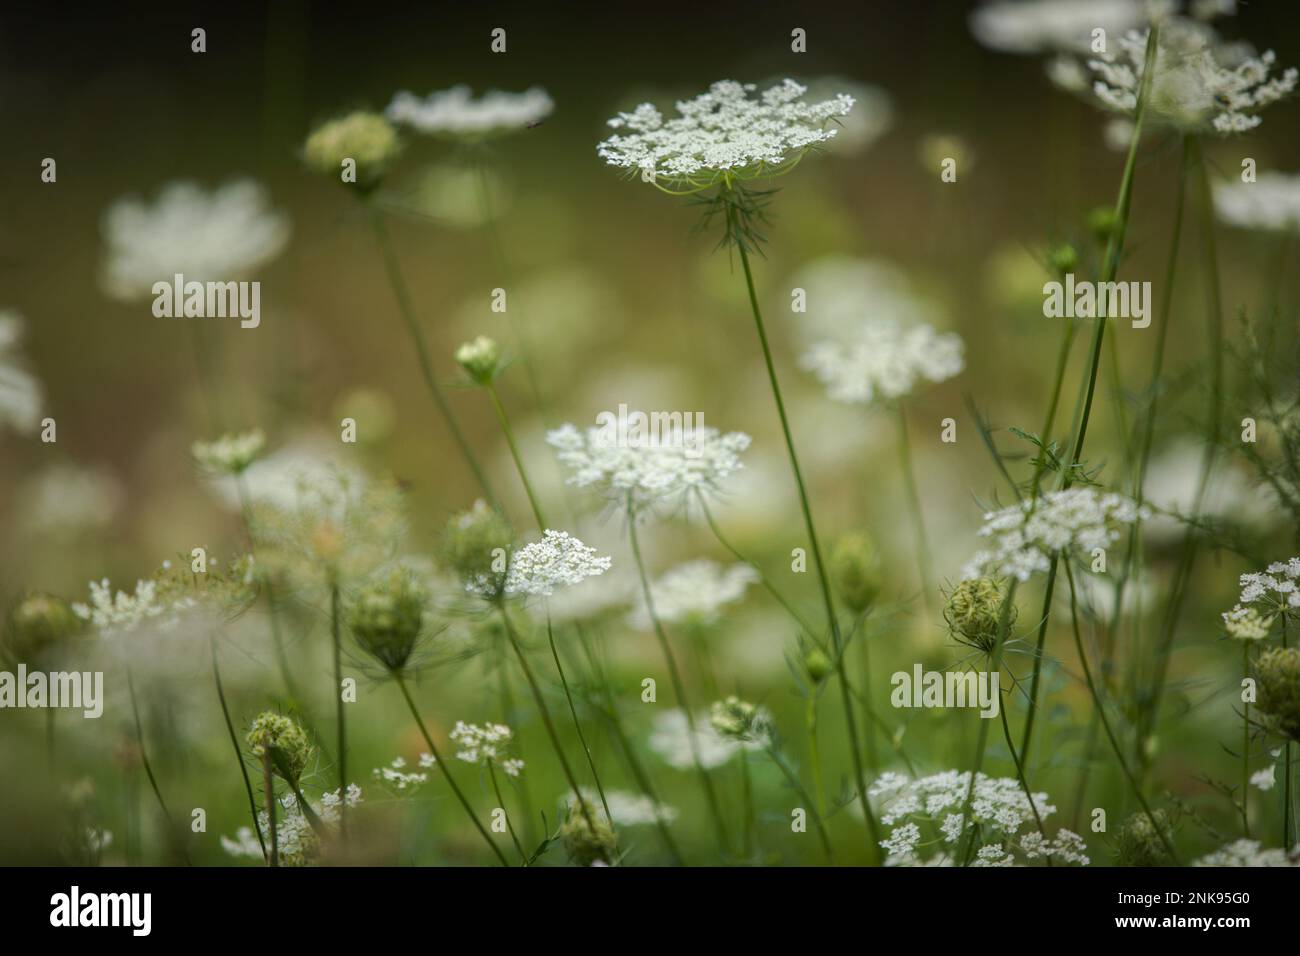 Queen Anne's lace flowers in a meadow Stock Photo